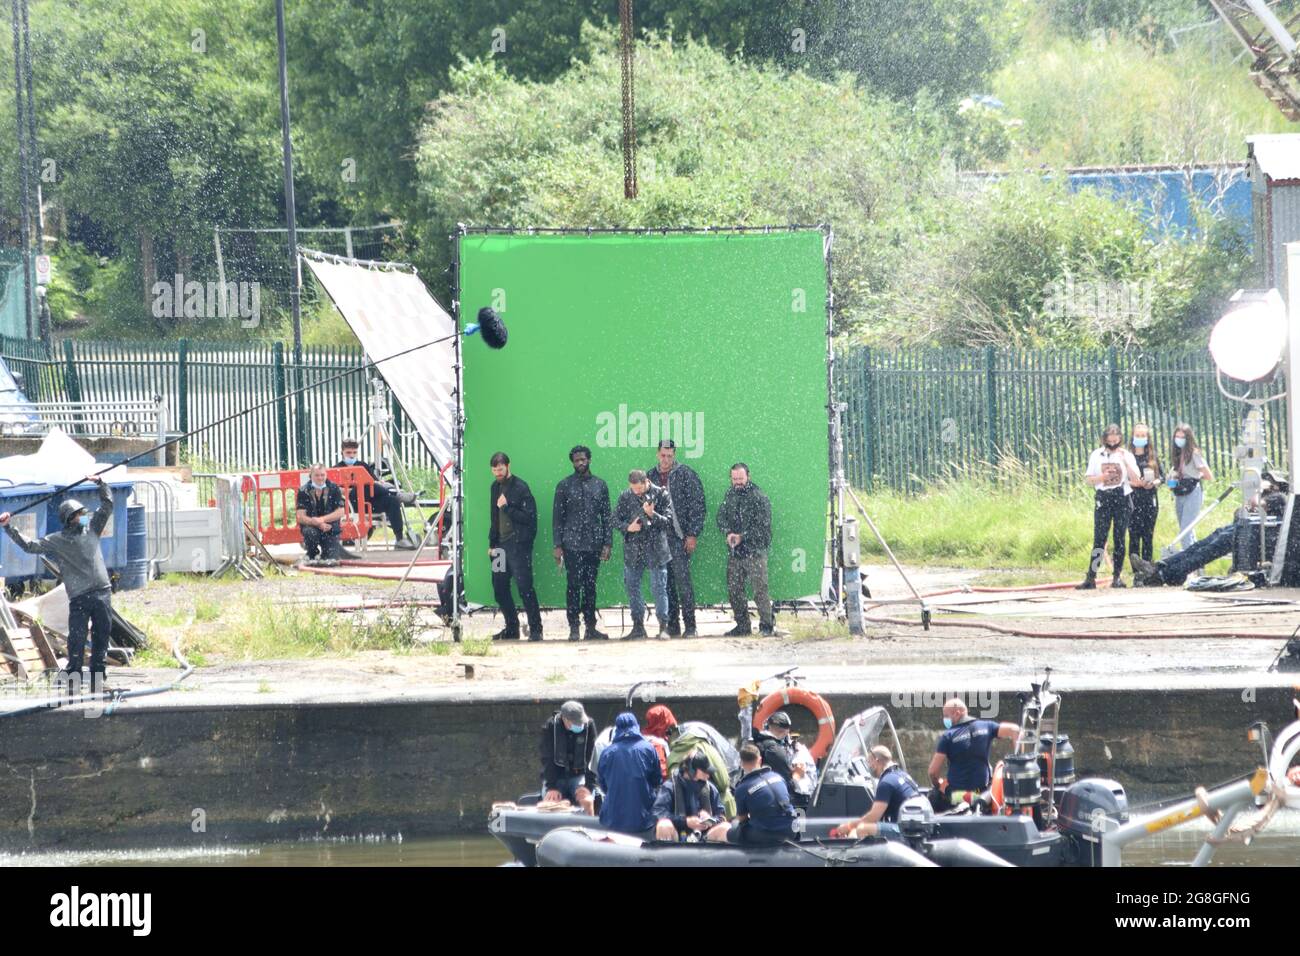 Filming of a scene from Gangs of London season 2 Stock Photo